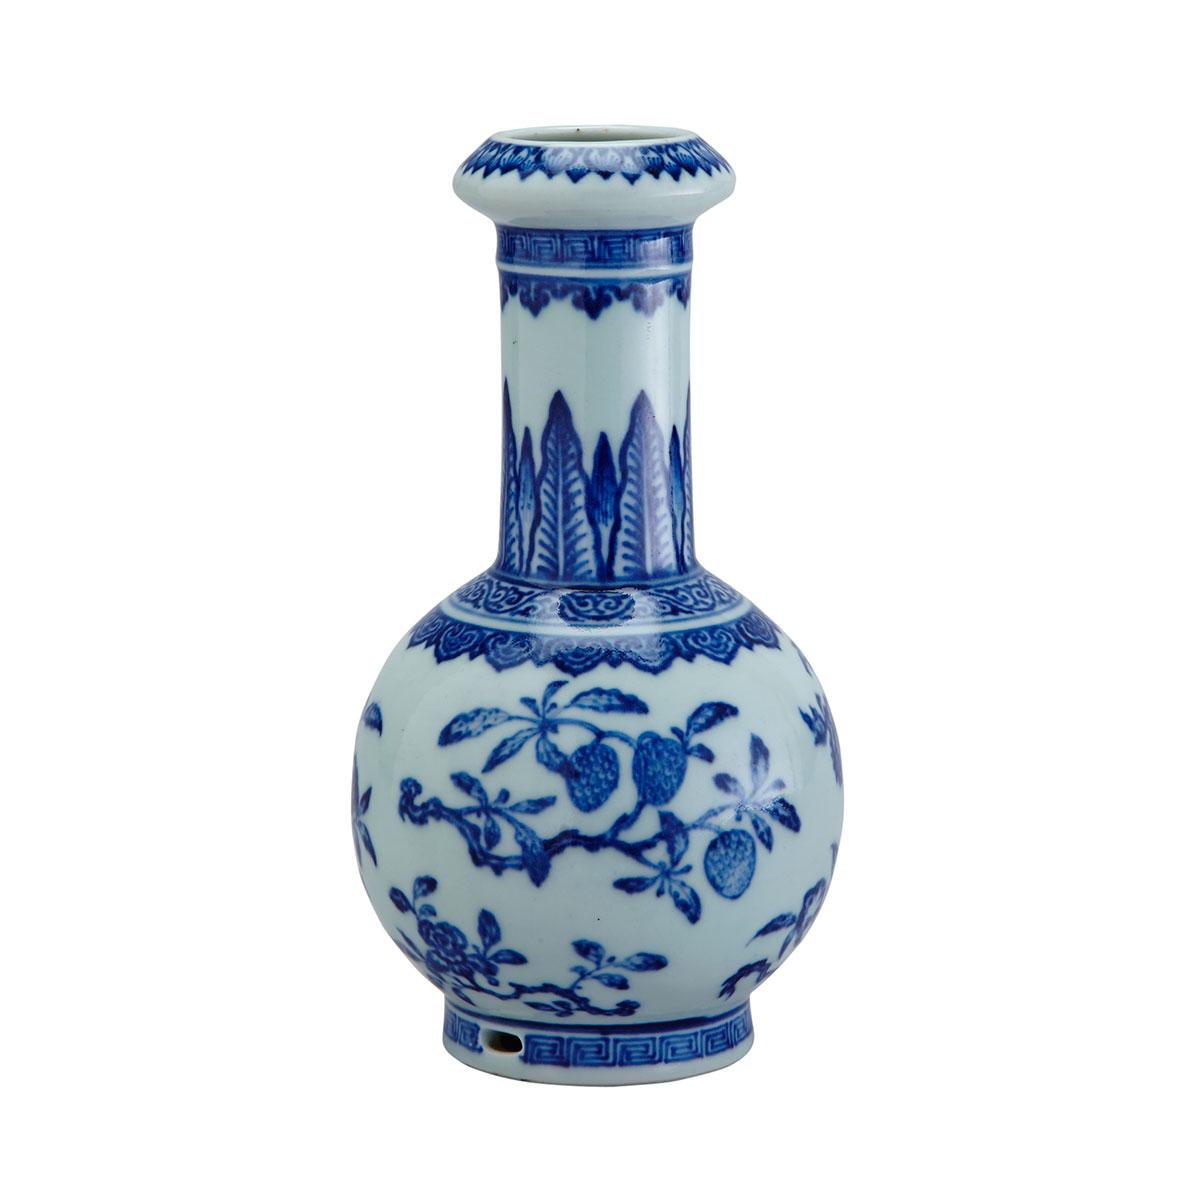 Unusual Blue and White Ming-Style Bottle Vase, 18th/19th Century